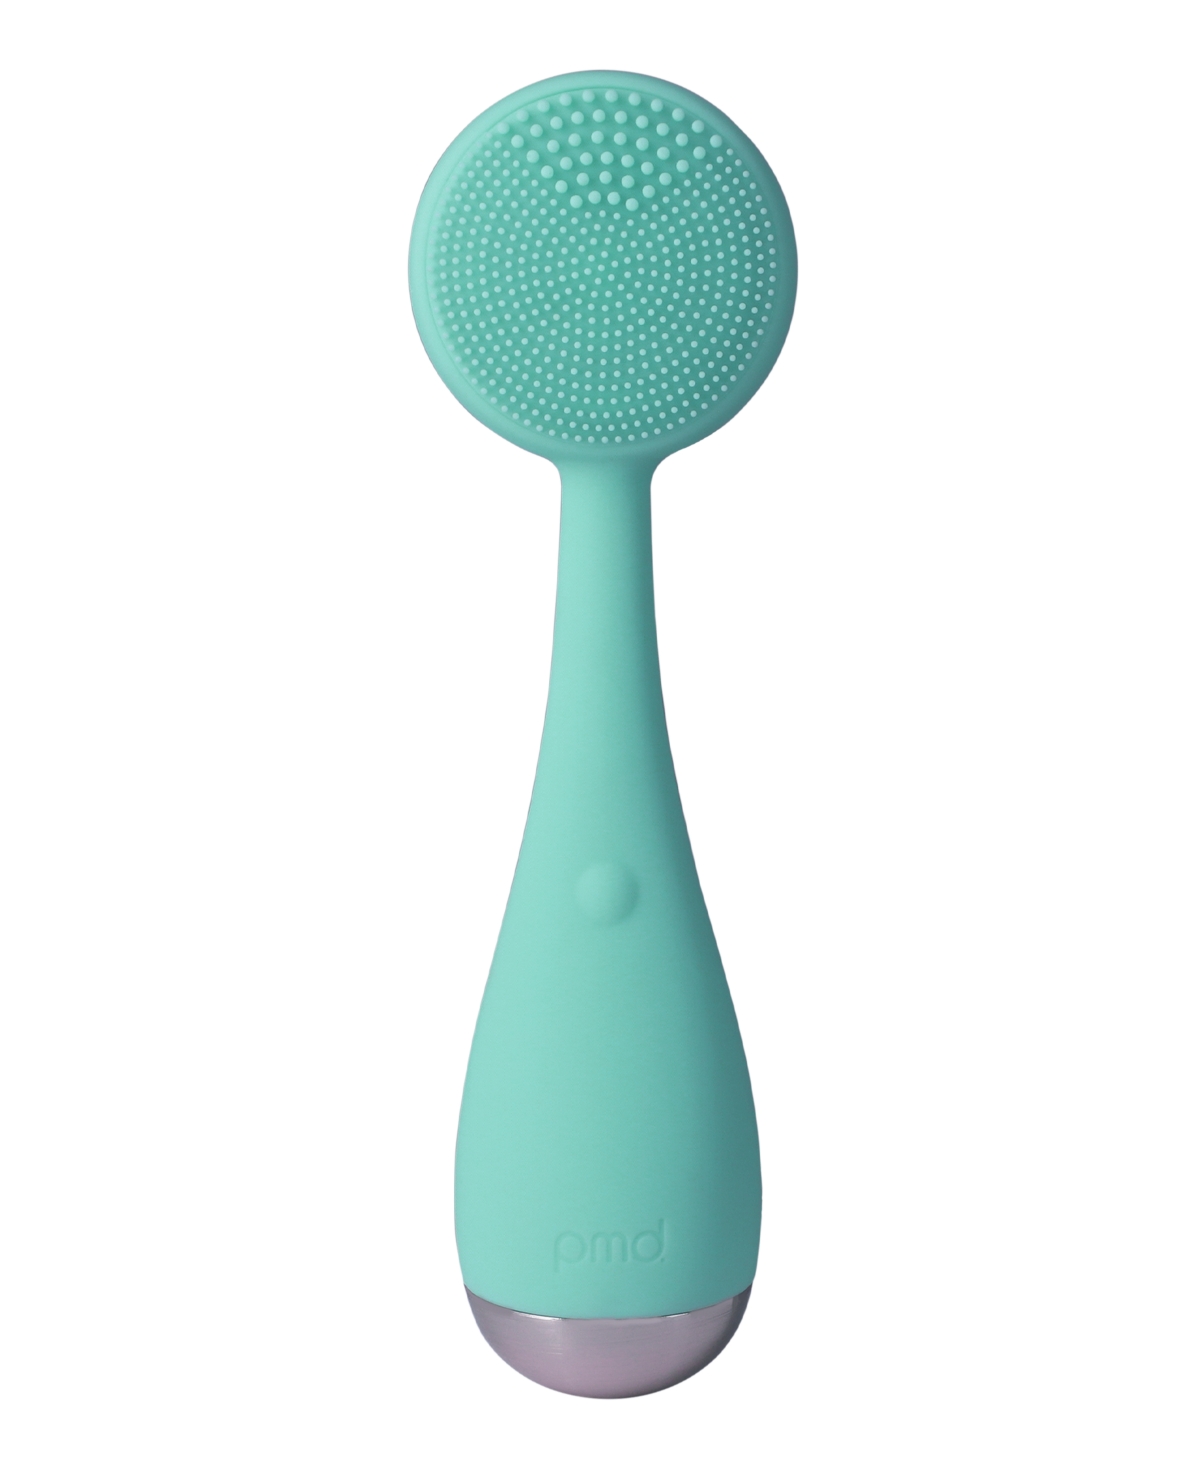 Clean Smart Facial Cleansing Device - Blush